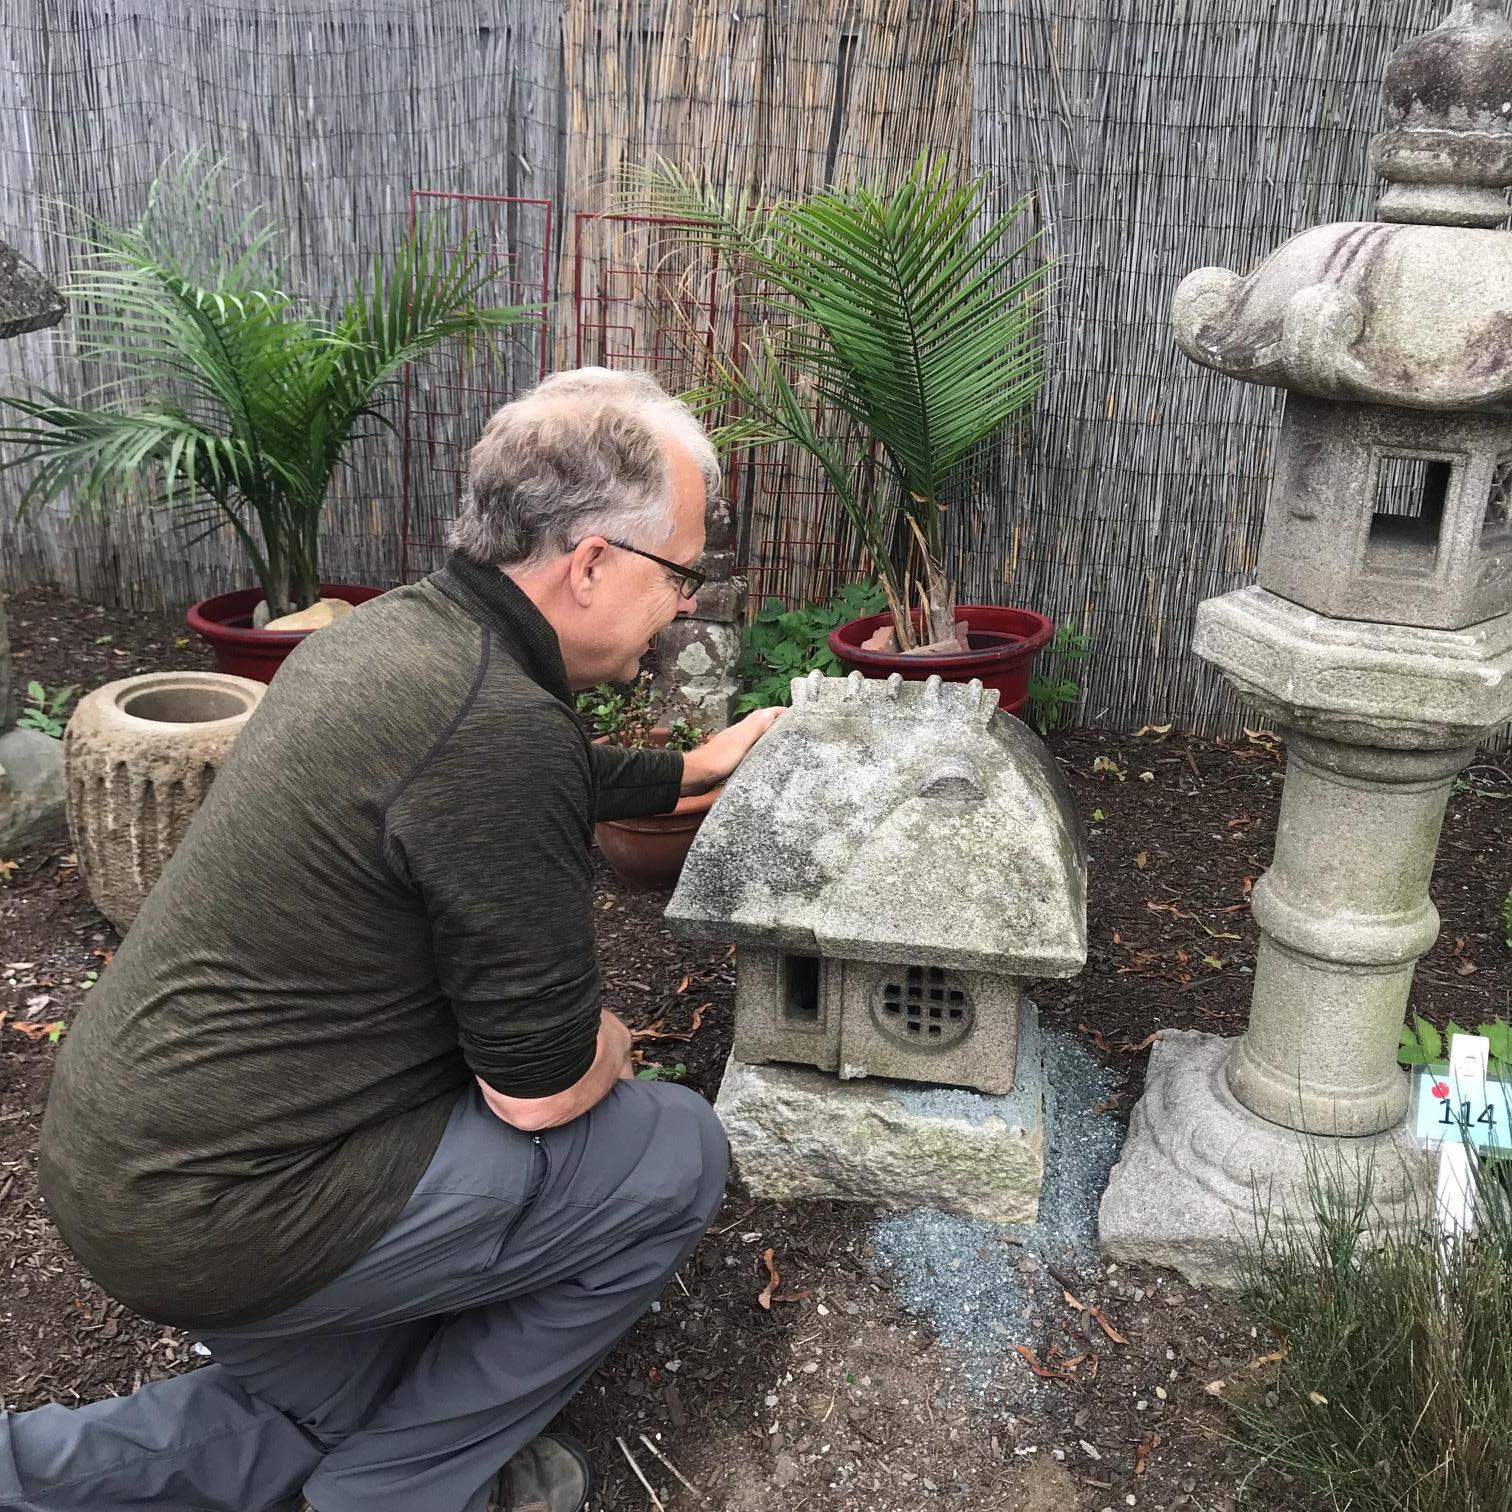 From our Recent Japanese Acquisitions Travels.

Here's a beautiful and unique way to accent your indoor or outdoor garden space with this treasure from Japan!

This is a two-piece carving of one of Japan's great historic architectural forms -